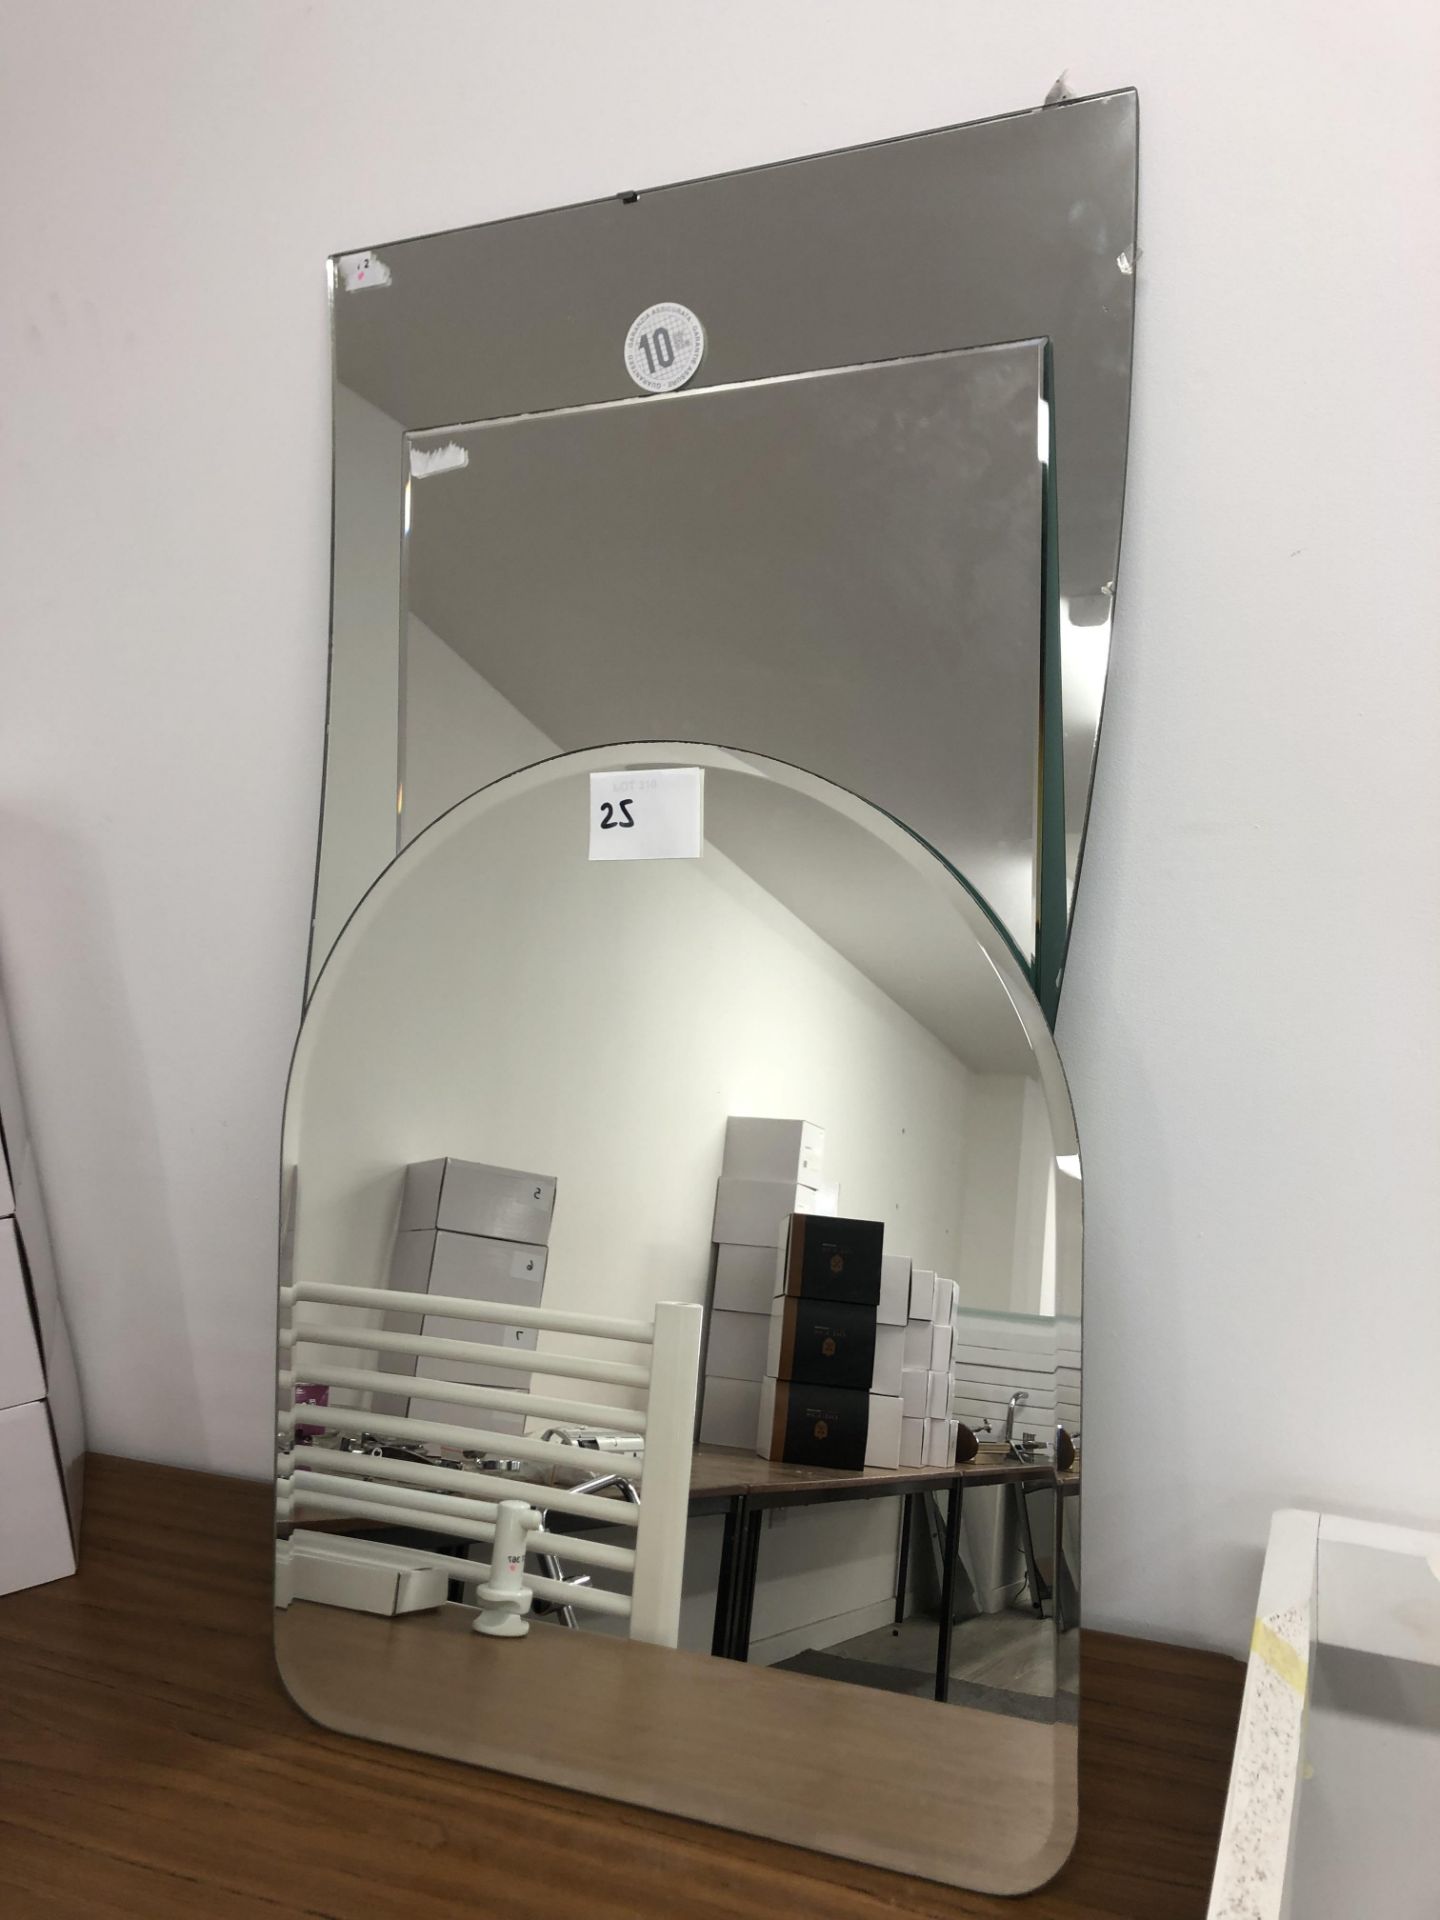 COLLECTION OF 6 MIRRORS, STRAIGHT, WAVED,